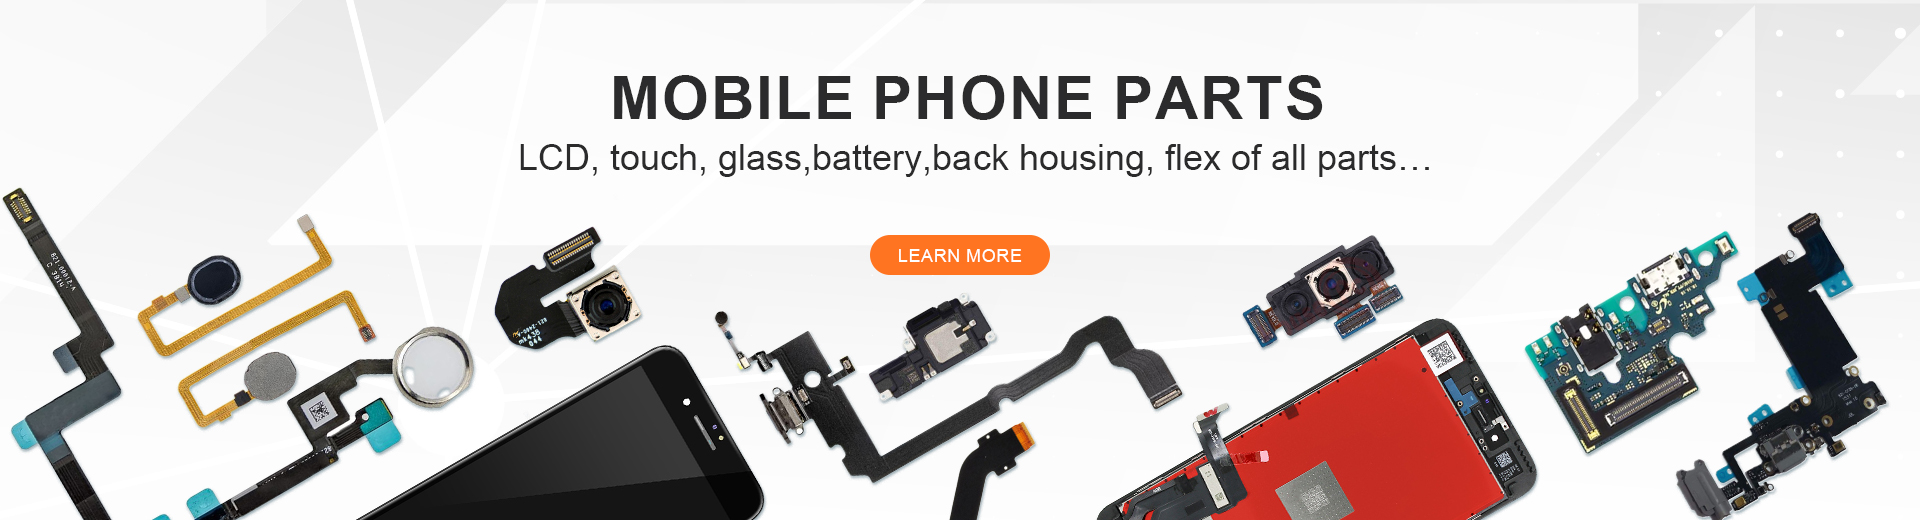 Mobile phone spare parts